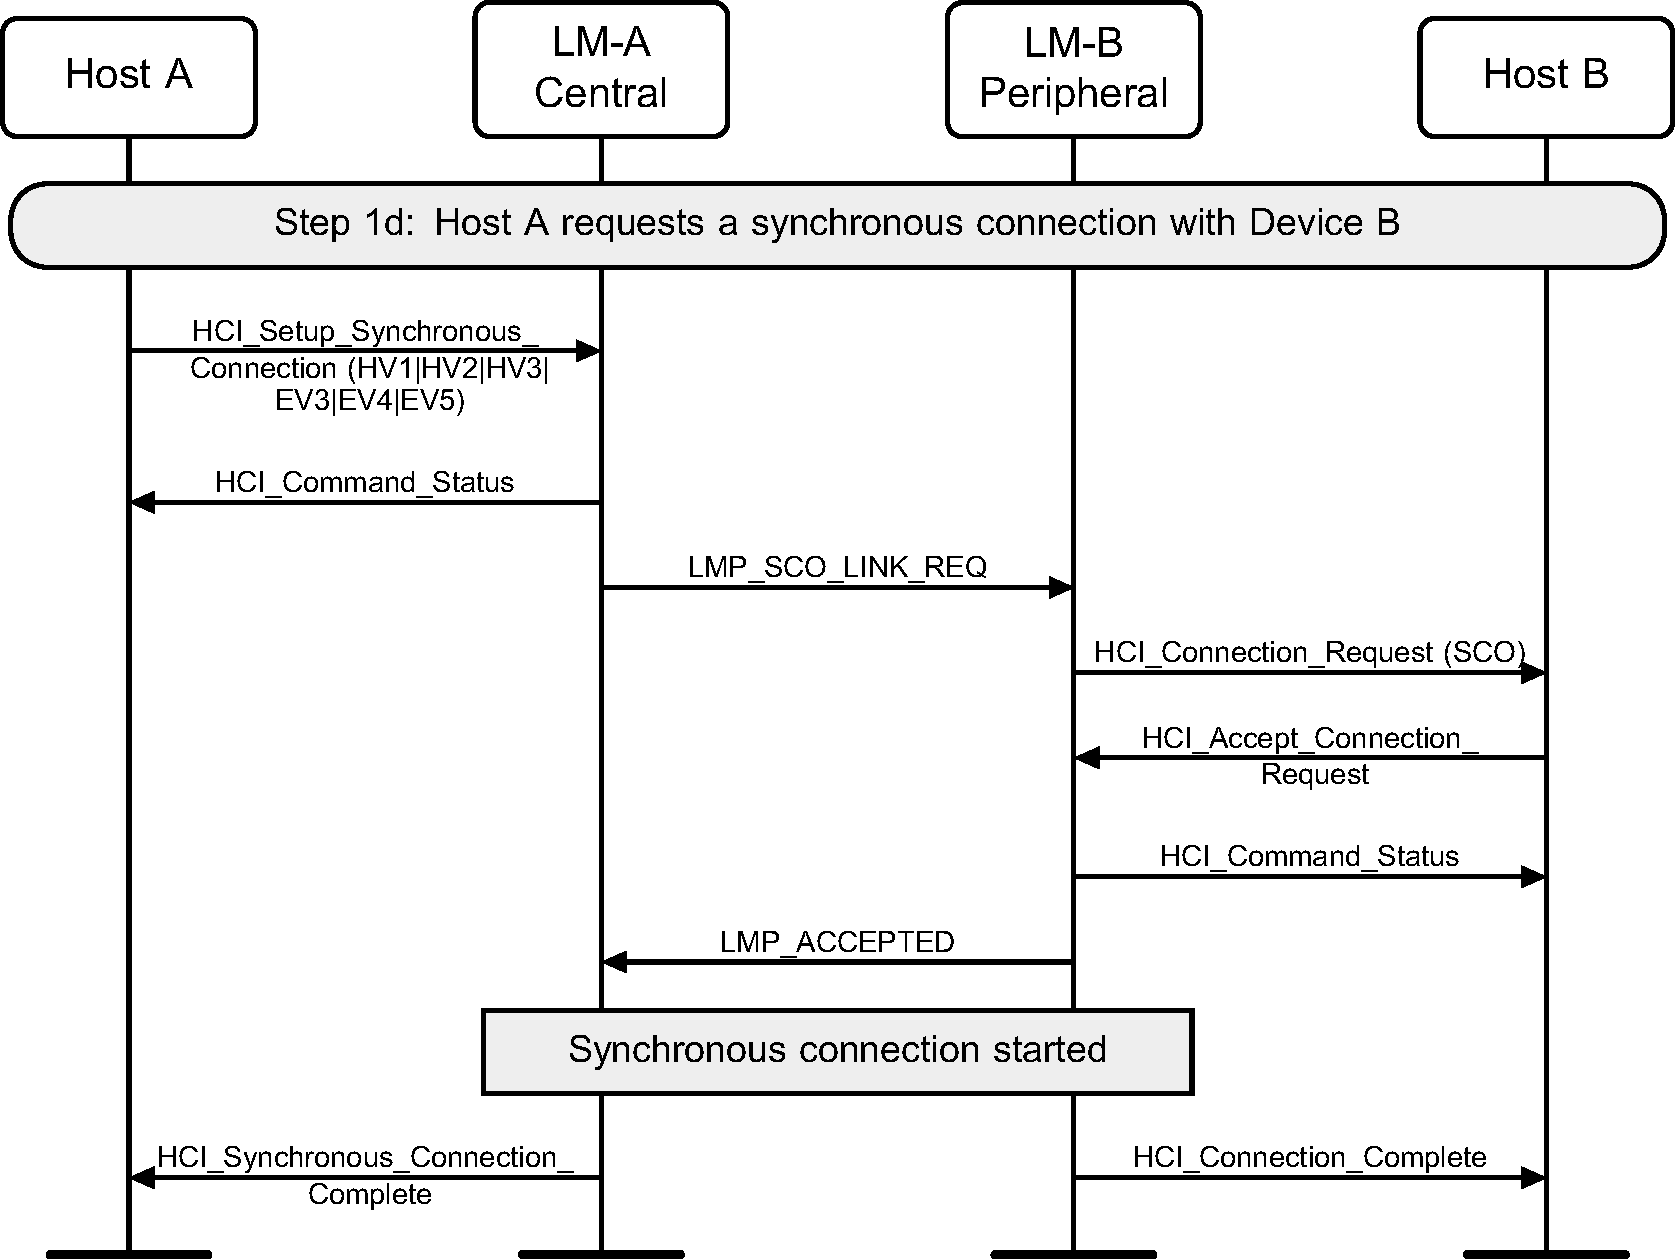 Central requests synchronous connection with legacy Peripheral